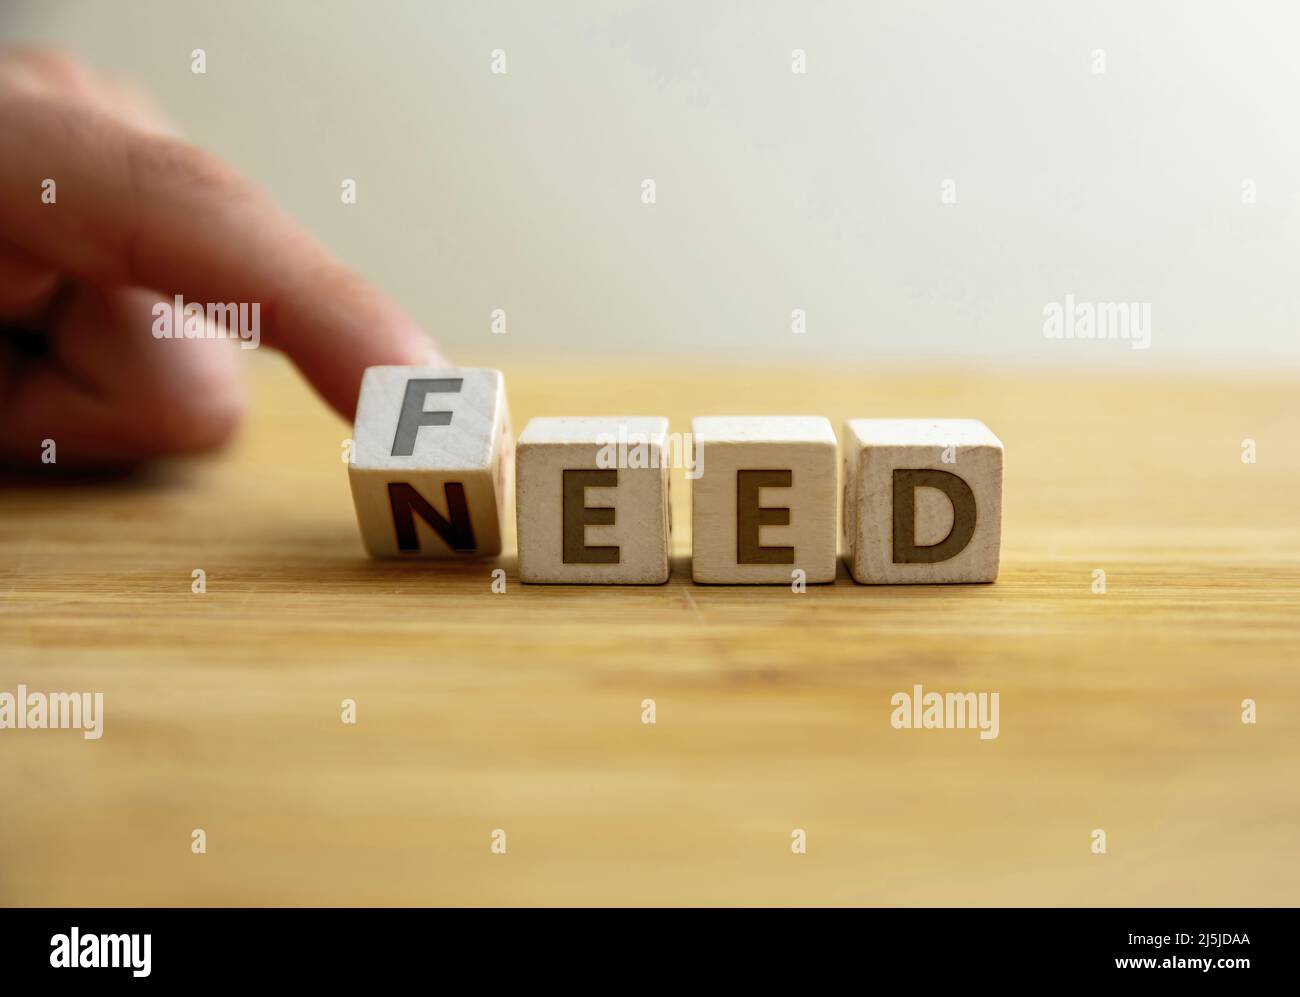 Need to feed concept. Hand flips letter on wooden cube changing the word need to feed. Message for food assistance, famine eradication, children malnu Stock Photo